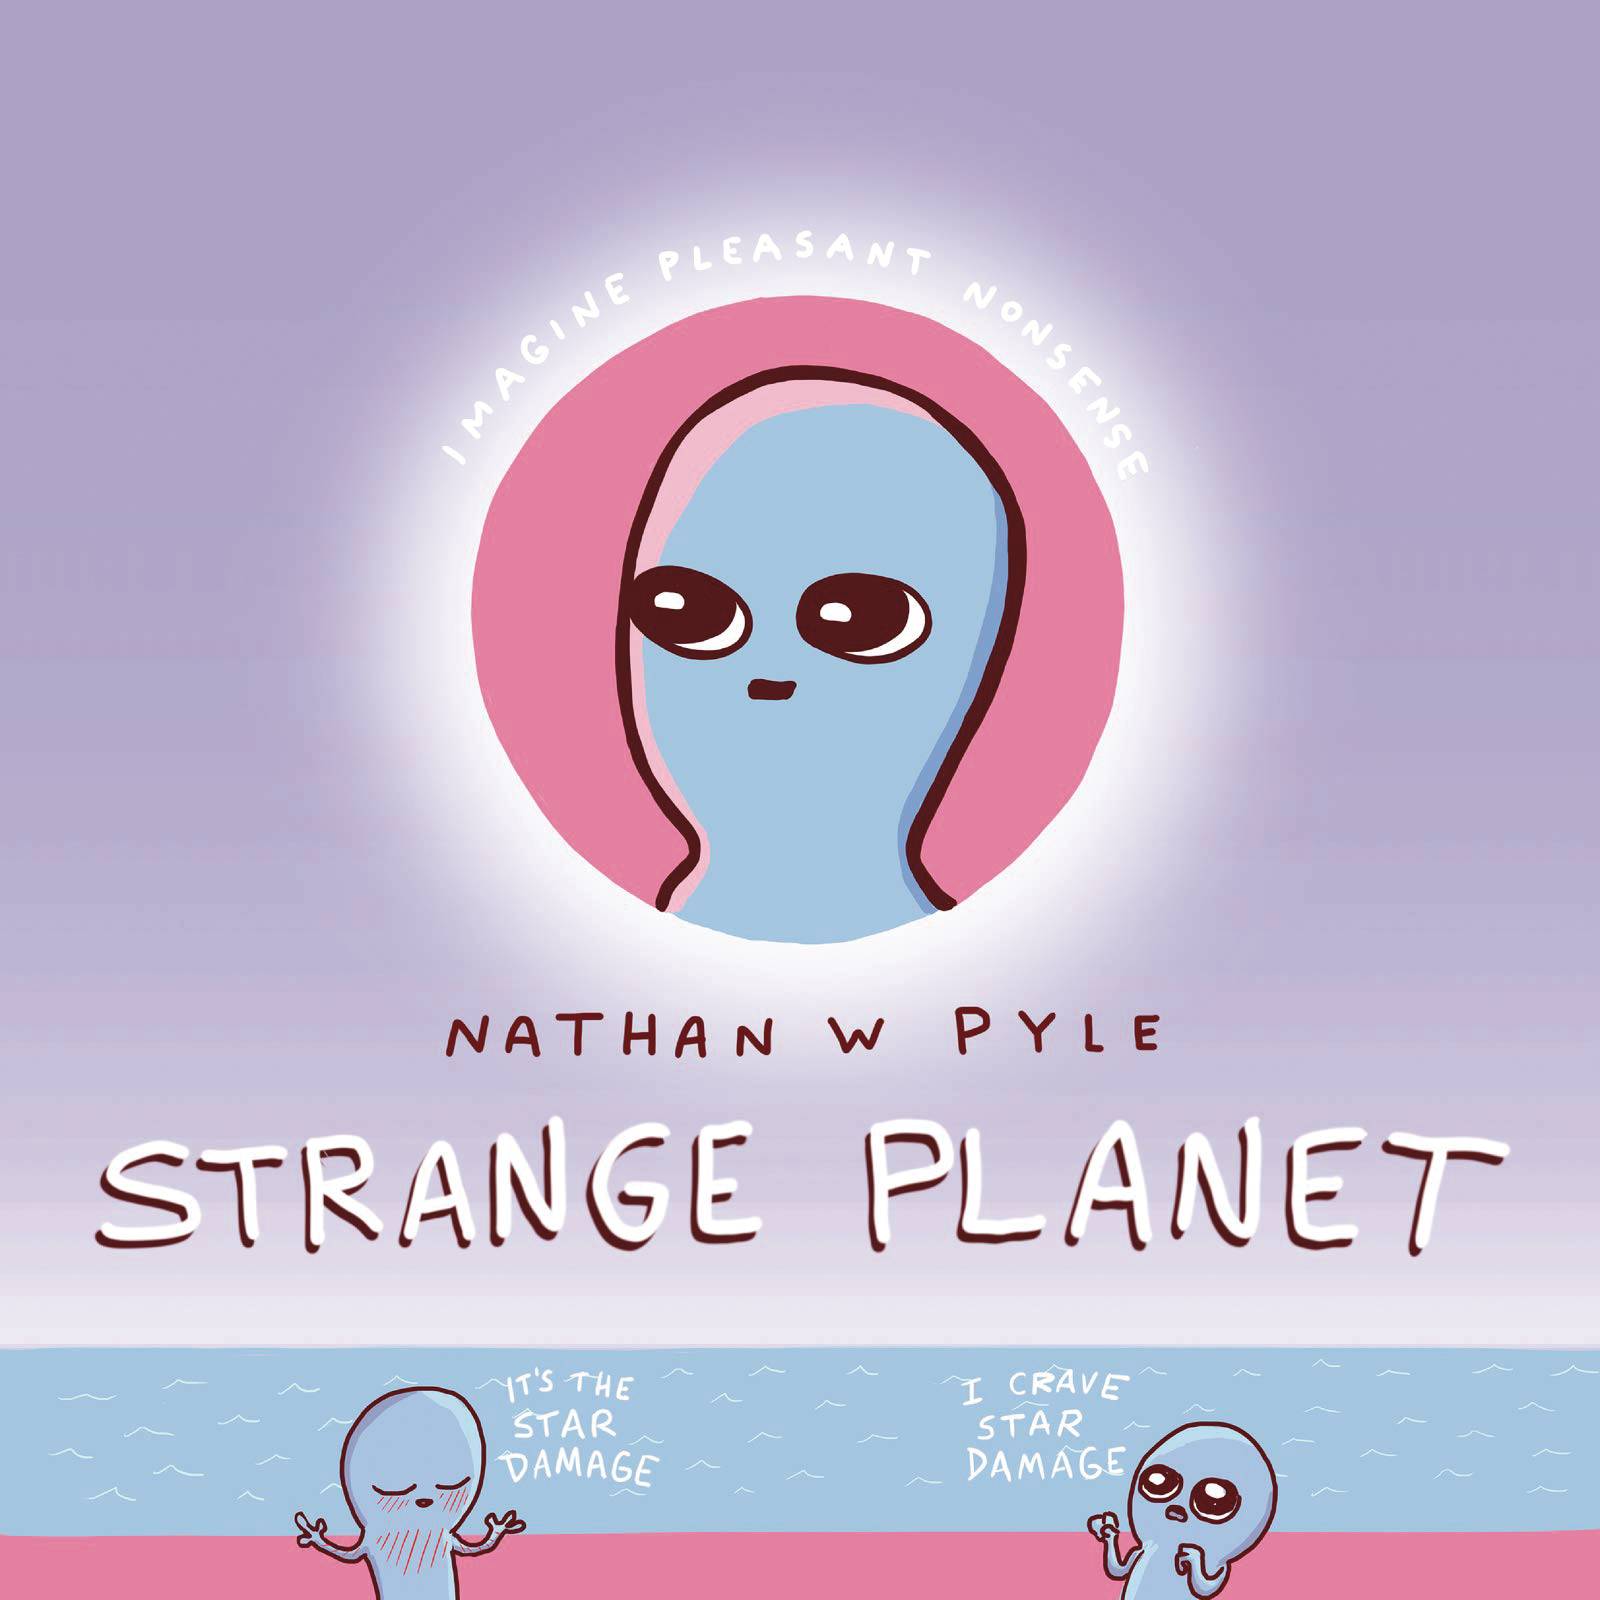 A blue-skinned alien smiles, surrounded by a glowing pink orb that resembles the sun. Below are two other aliens, one with sunburn across its chest, holding its arms out and proclaiming, "it's the star damage". The other looks up at the sky with wide eyes, saying, "I crave the star damage".